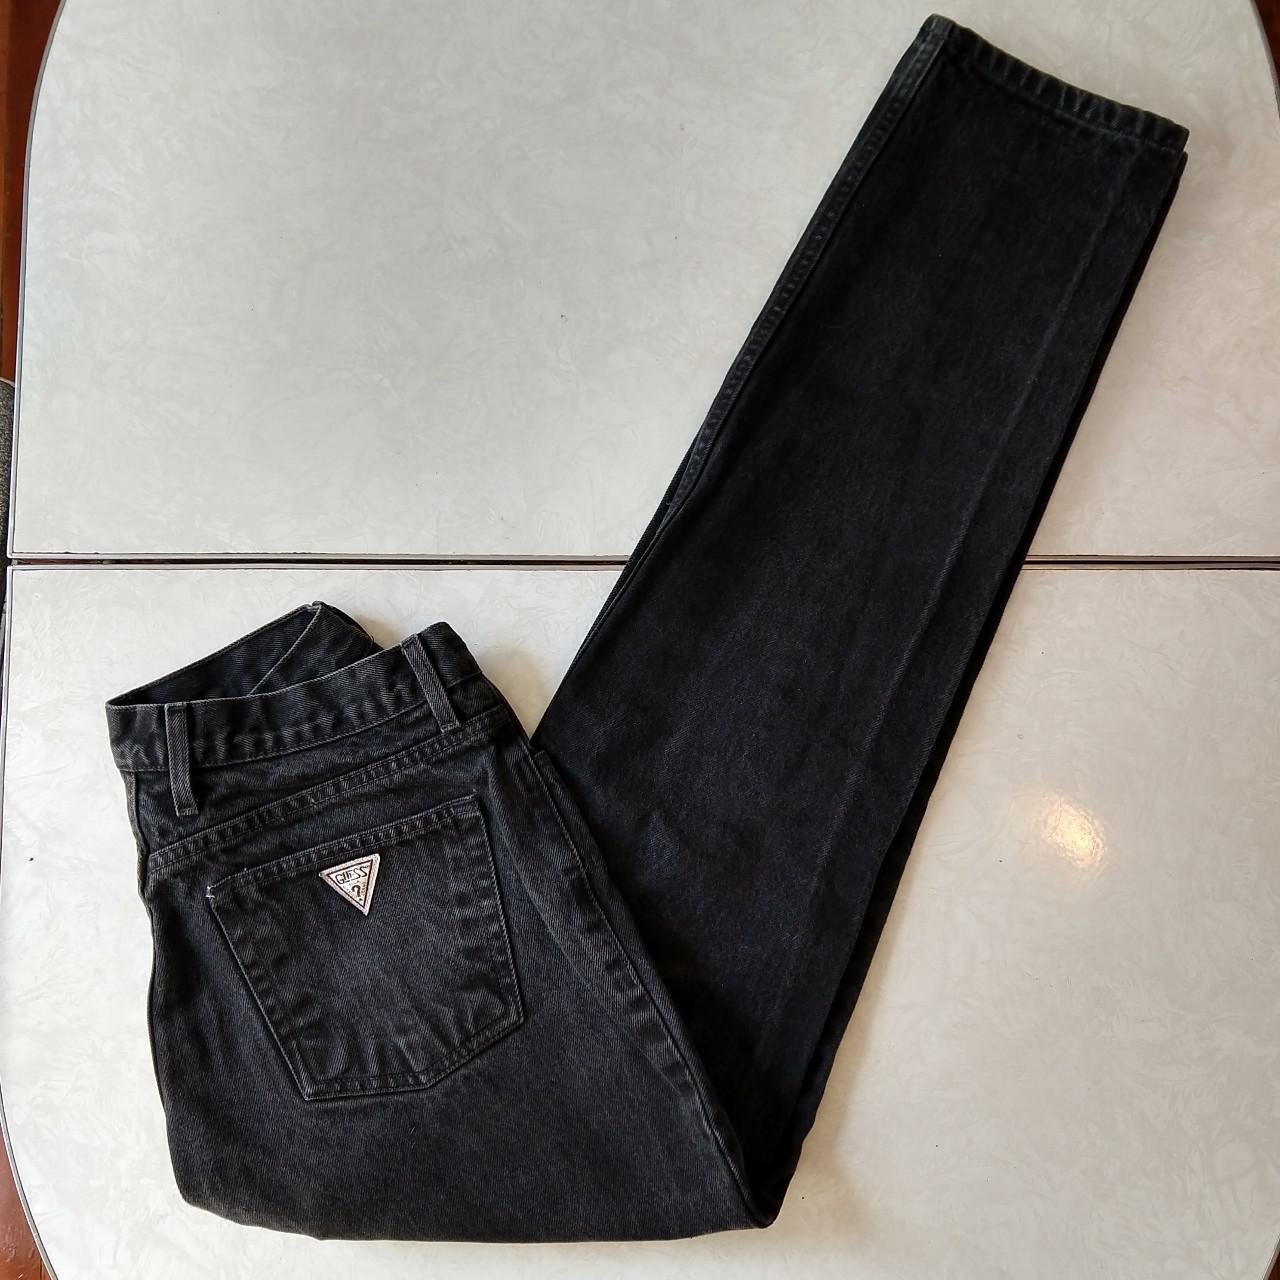 Product Image 2 - Vintage Guess jeans. Featuring the